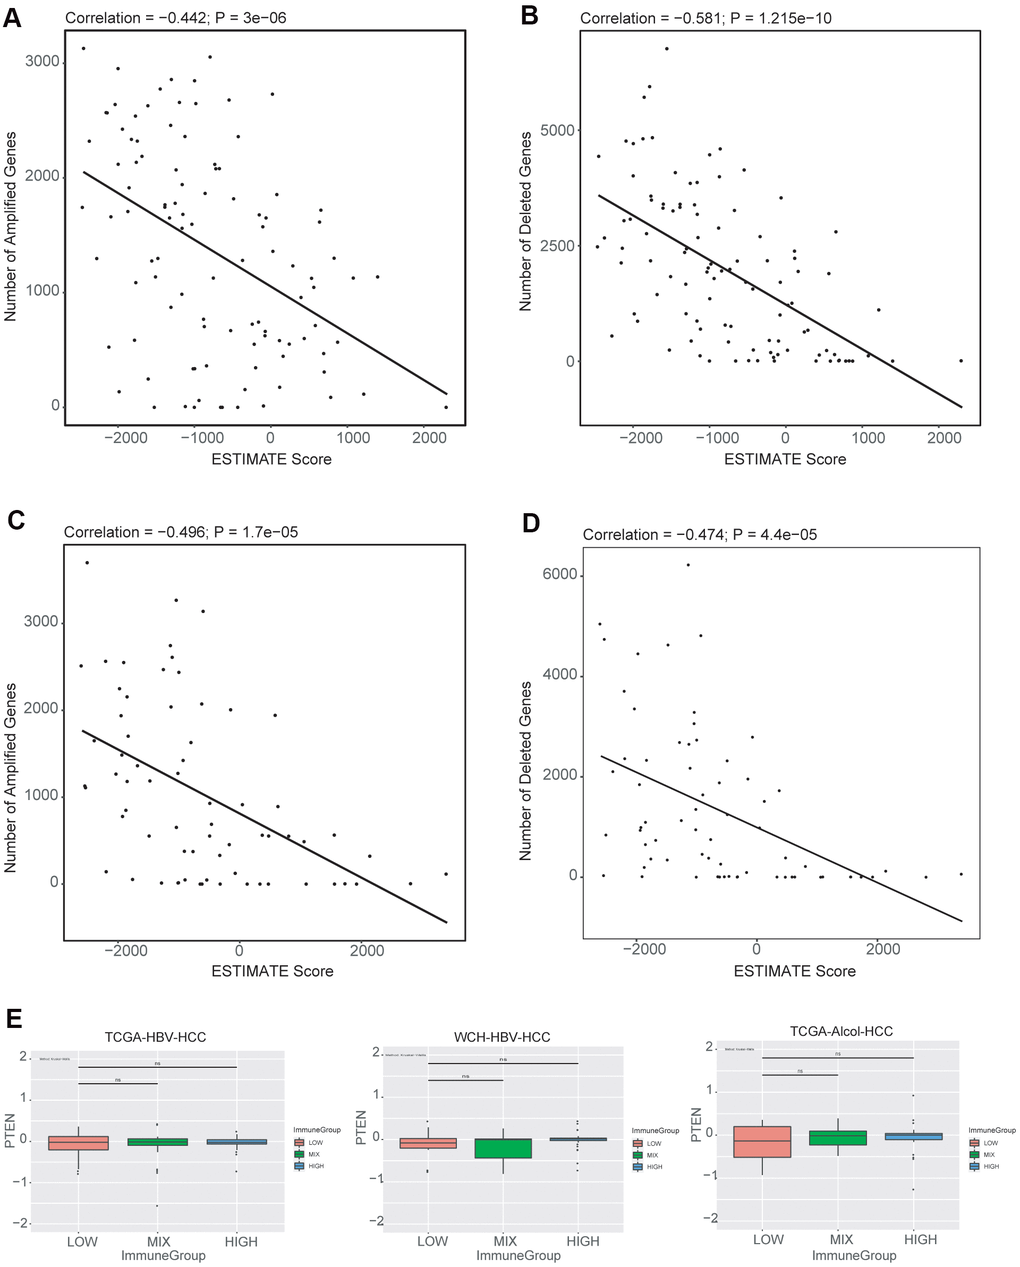 Associations between copy number alterations and ESTIMATE immune score. (A) Pearson correlation of the number of amplified genes and immune scores generated from ESTIMATE for the TCGA-HBV-HCC cohort. (B) Pearson correlation of the number of deleted genes and immune scores for the TCGA-HBV-HCC cohort. (C) Pearson correlation of the number of amplified genes and immune scores for the TCGA-Alcol-HCC cohort. (D) Pearson correlation of the number of deleted genes and immune scores for the TCGA-Alcol-HCC cohort; (E) Boxplot of PTEN copy number levels (in log2 level) in each of the immune infiltrate groups (HIGH, MIX and LOW) for the TCGA-HBV-HCC, WCH-HBV-HCC and TCGA-Alcol-HCC groups.